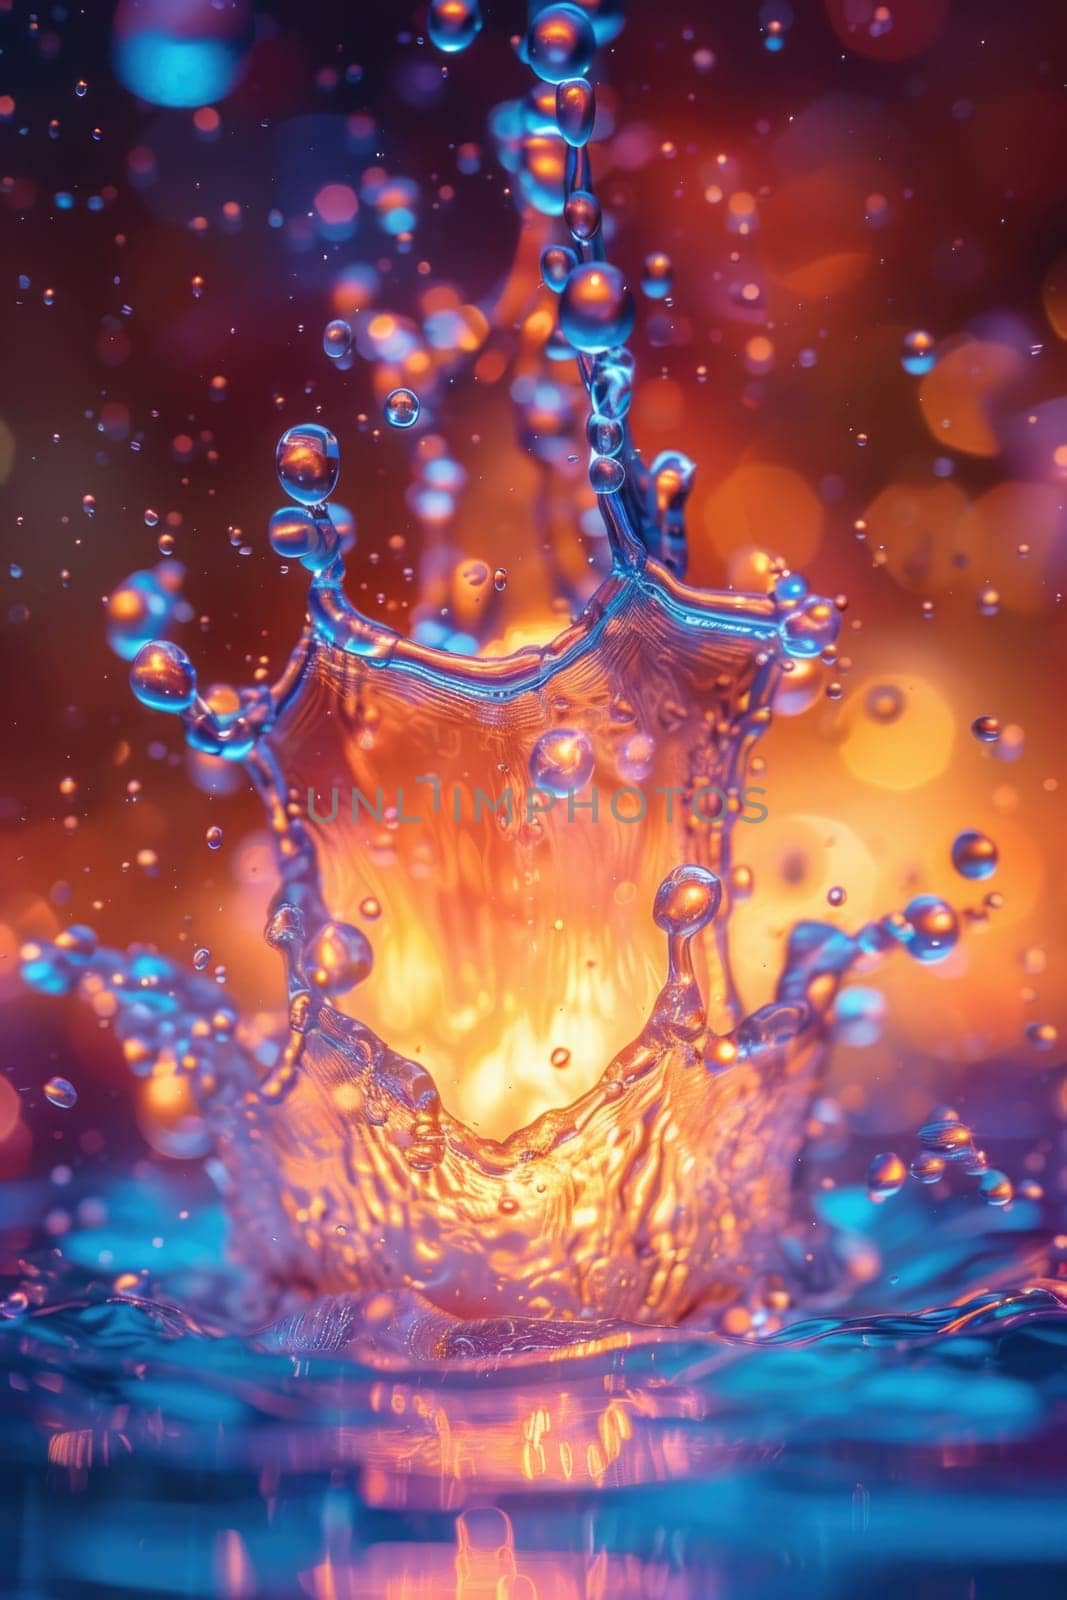 Crowned Water Splash by but_photo